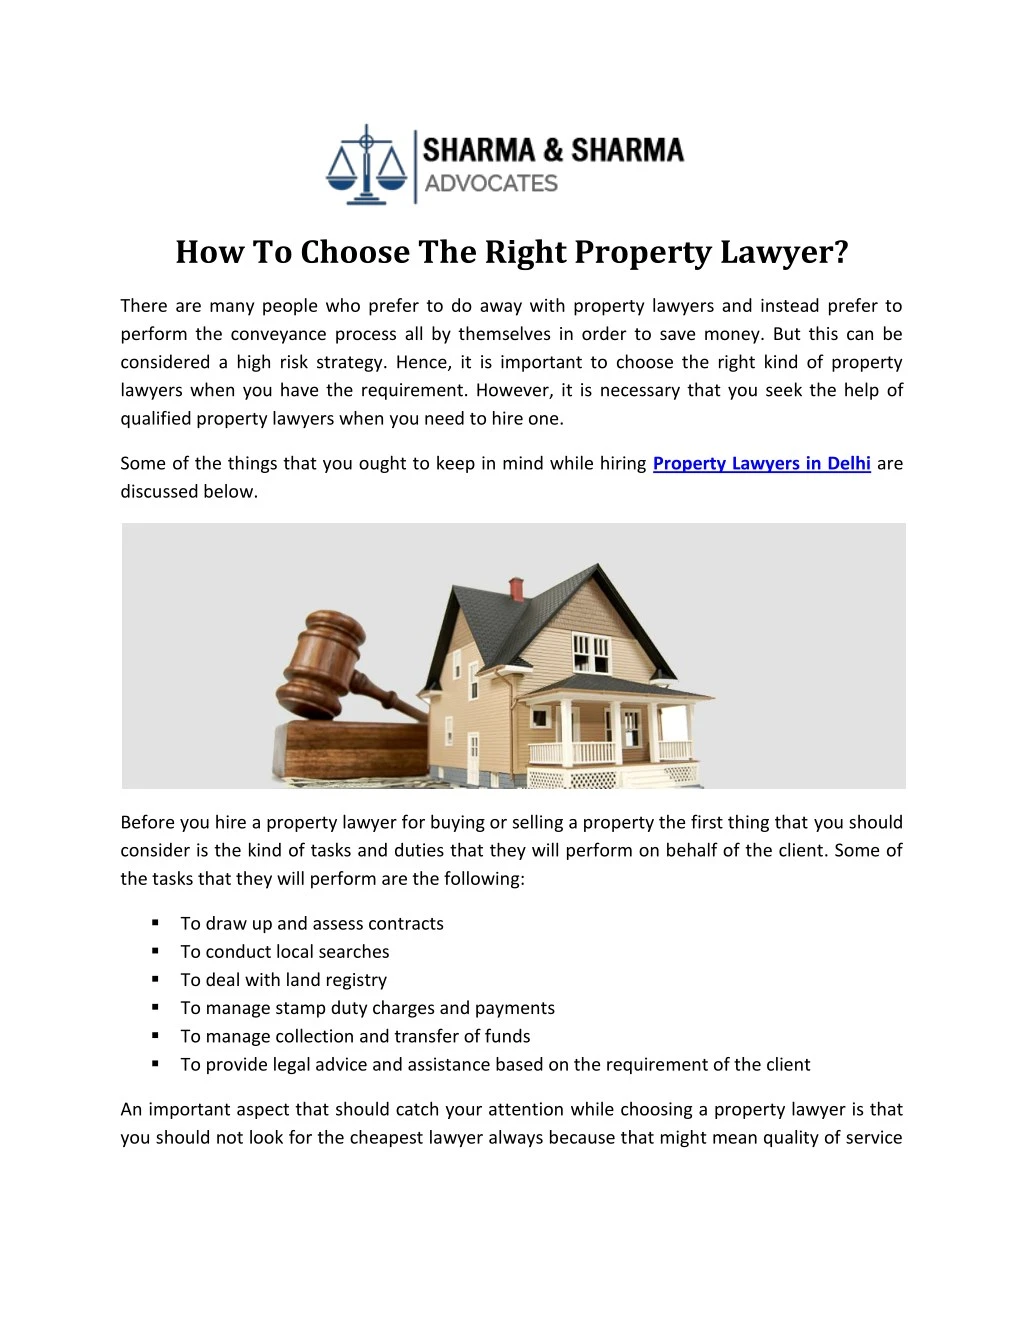 how to choose the right property lawyer